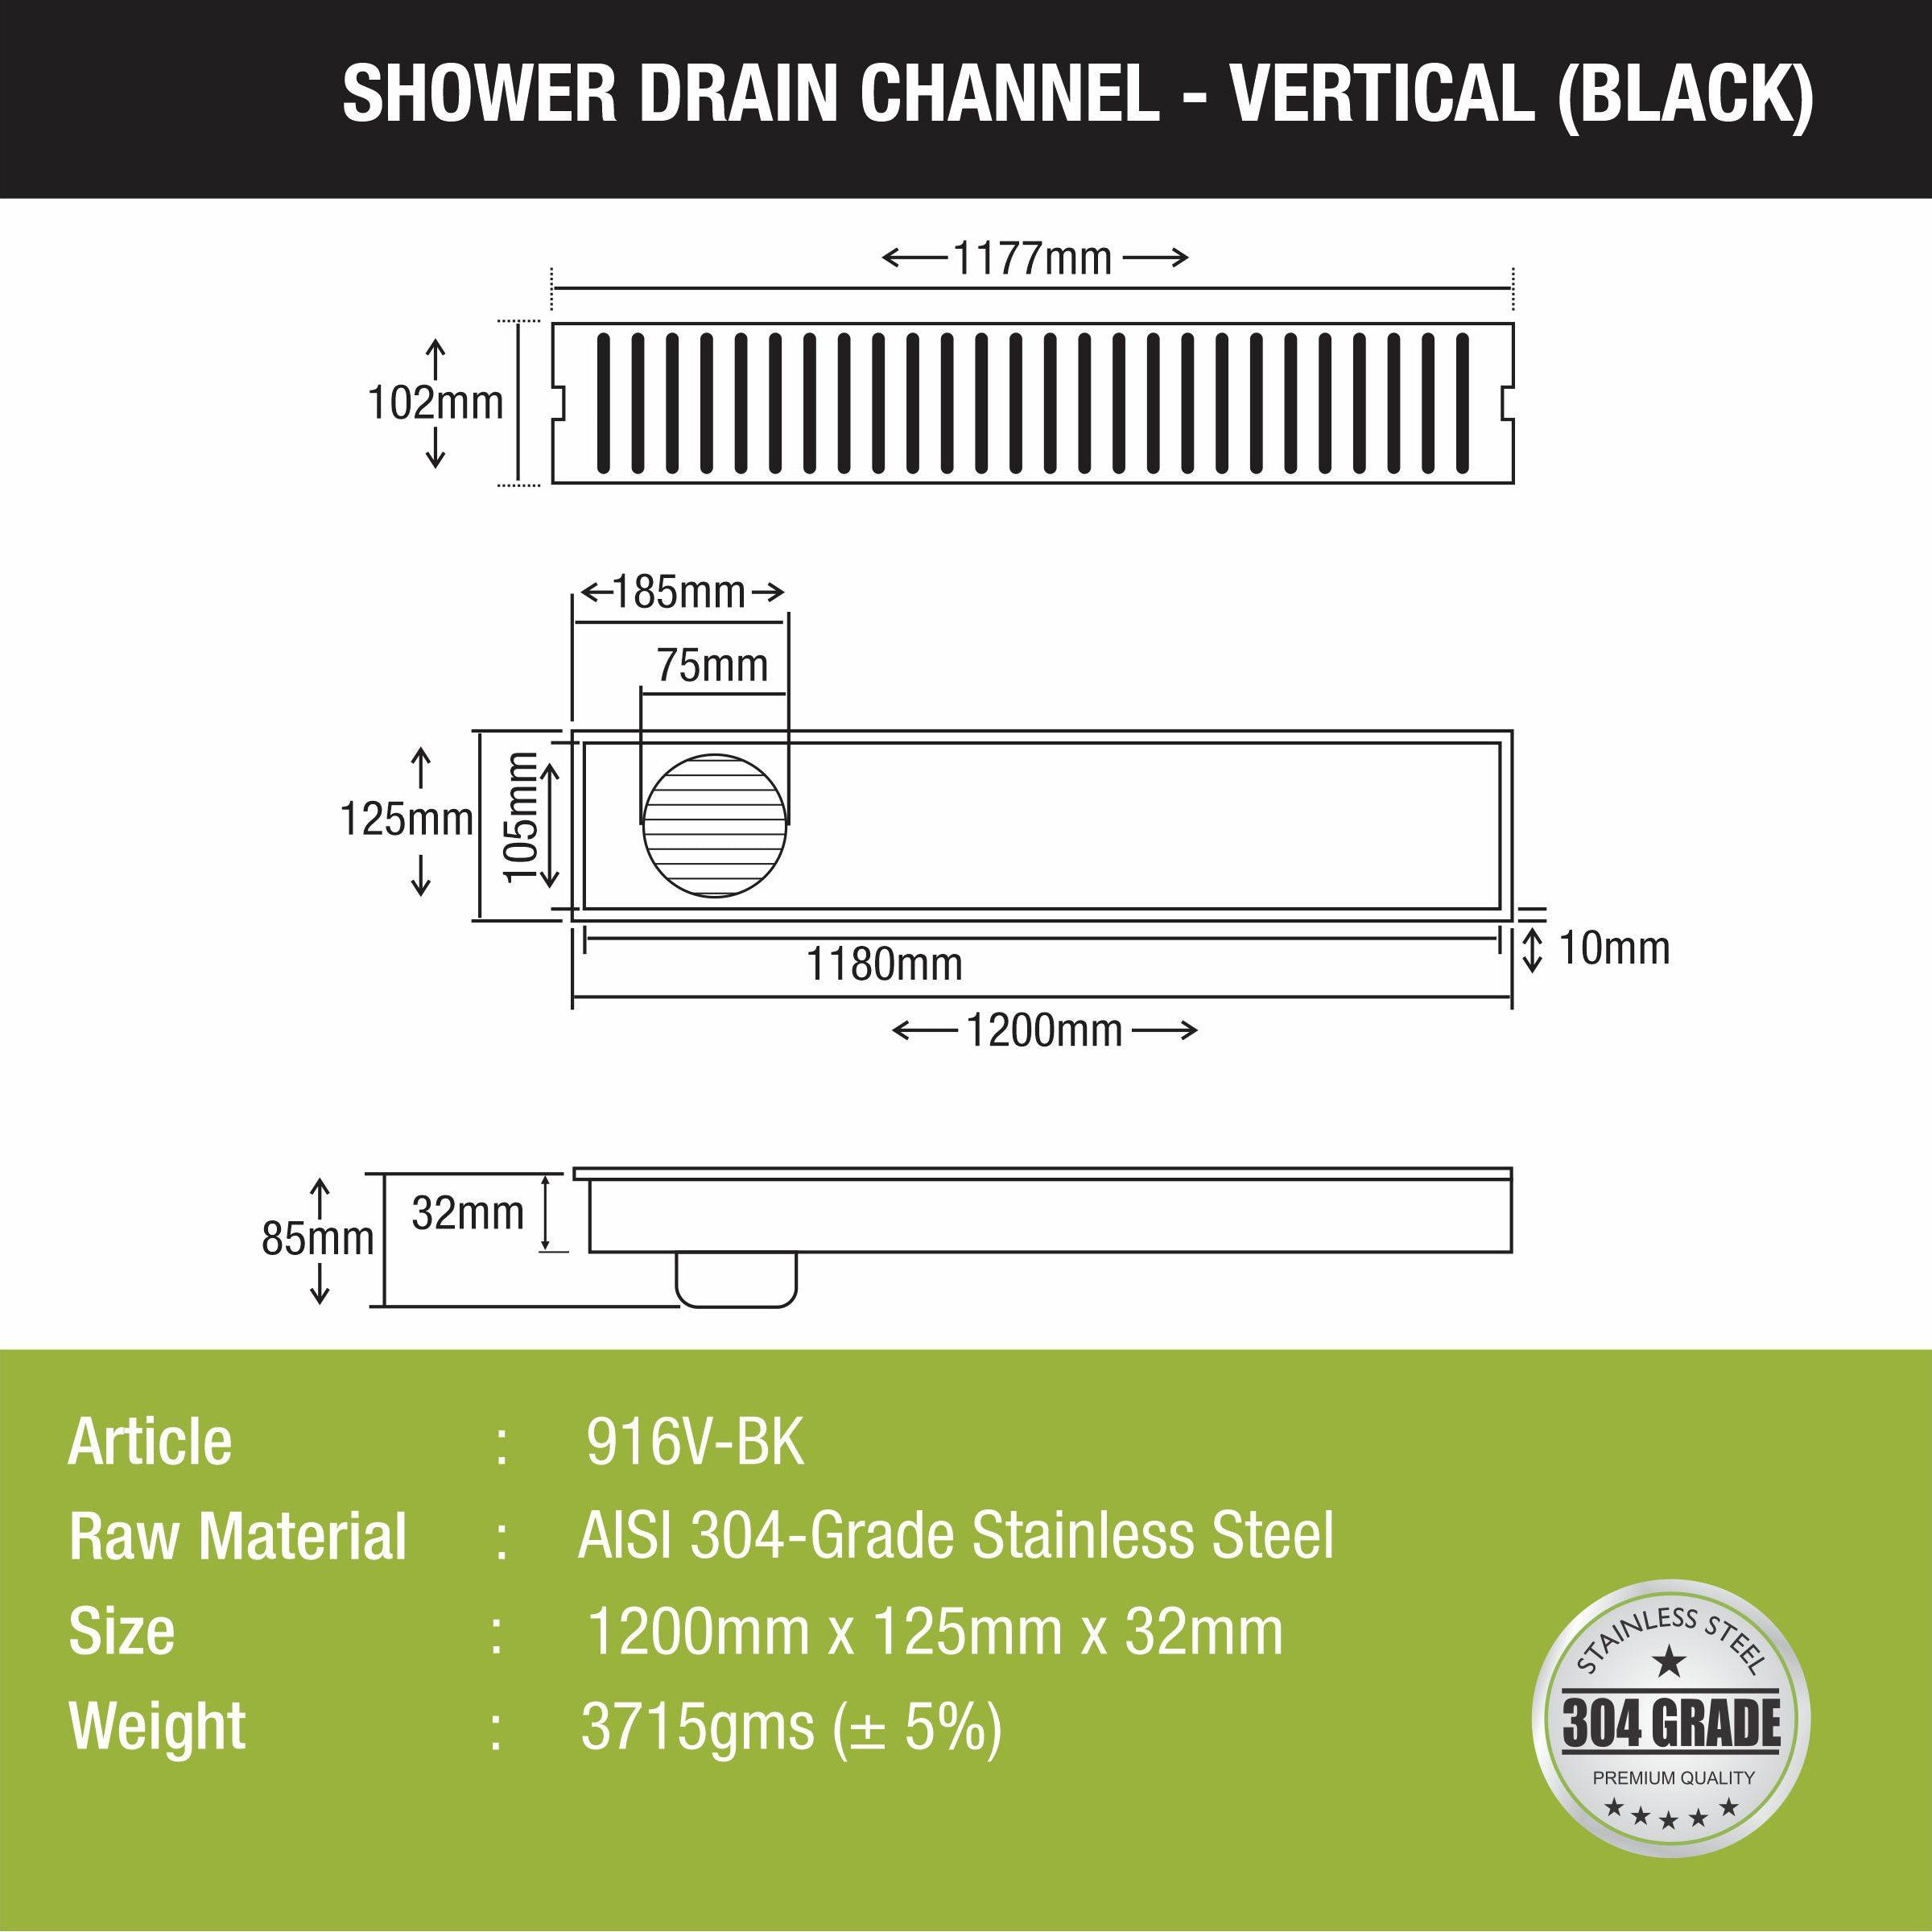 Vertical Shower Drain Channel - Black (48 x 5 Inches) size and measurement